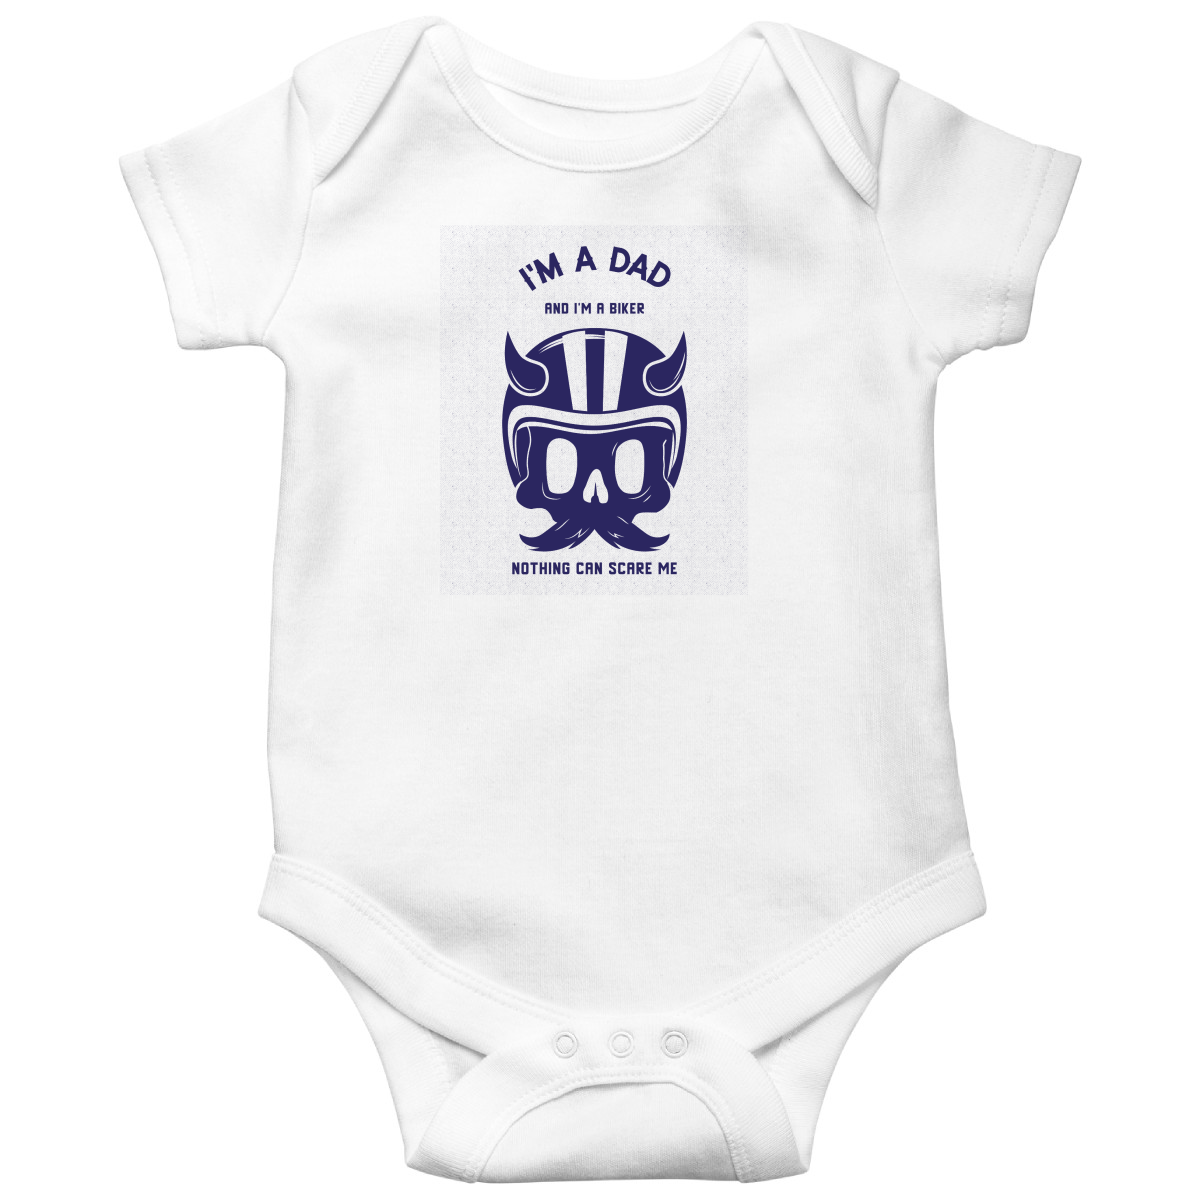 I'm a dad and a biker Baby Bodysuits | White